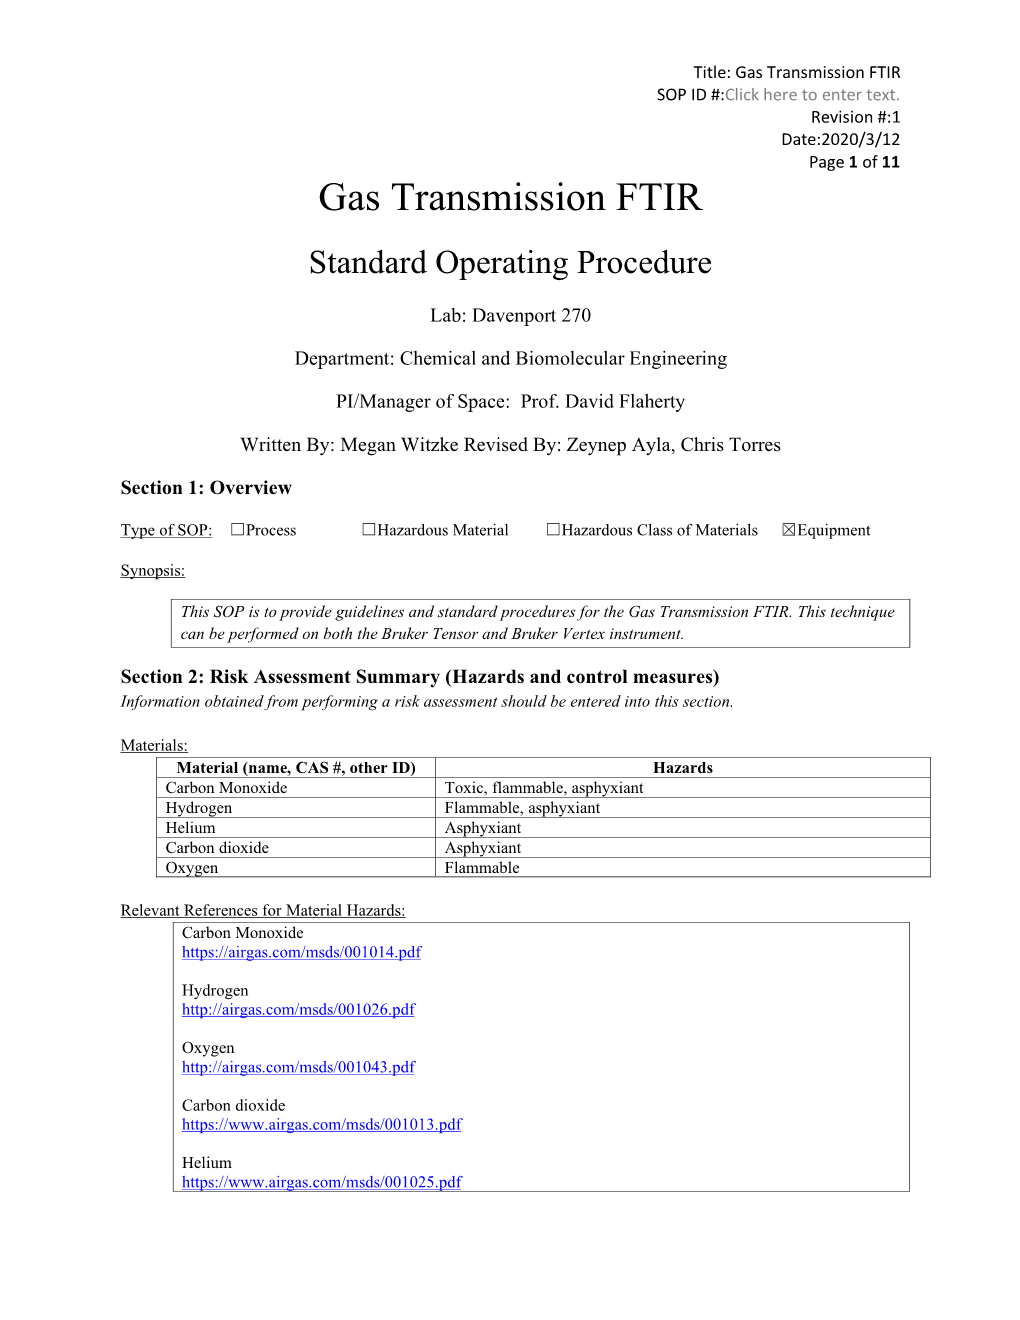 Gas Transmission FTIR SOP ID #:Click Here to Enter Text